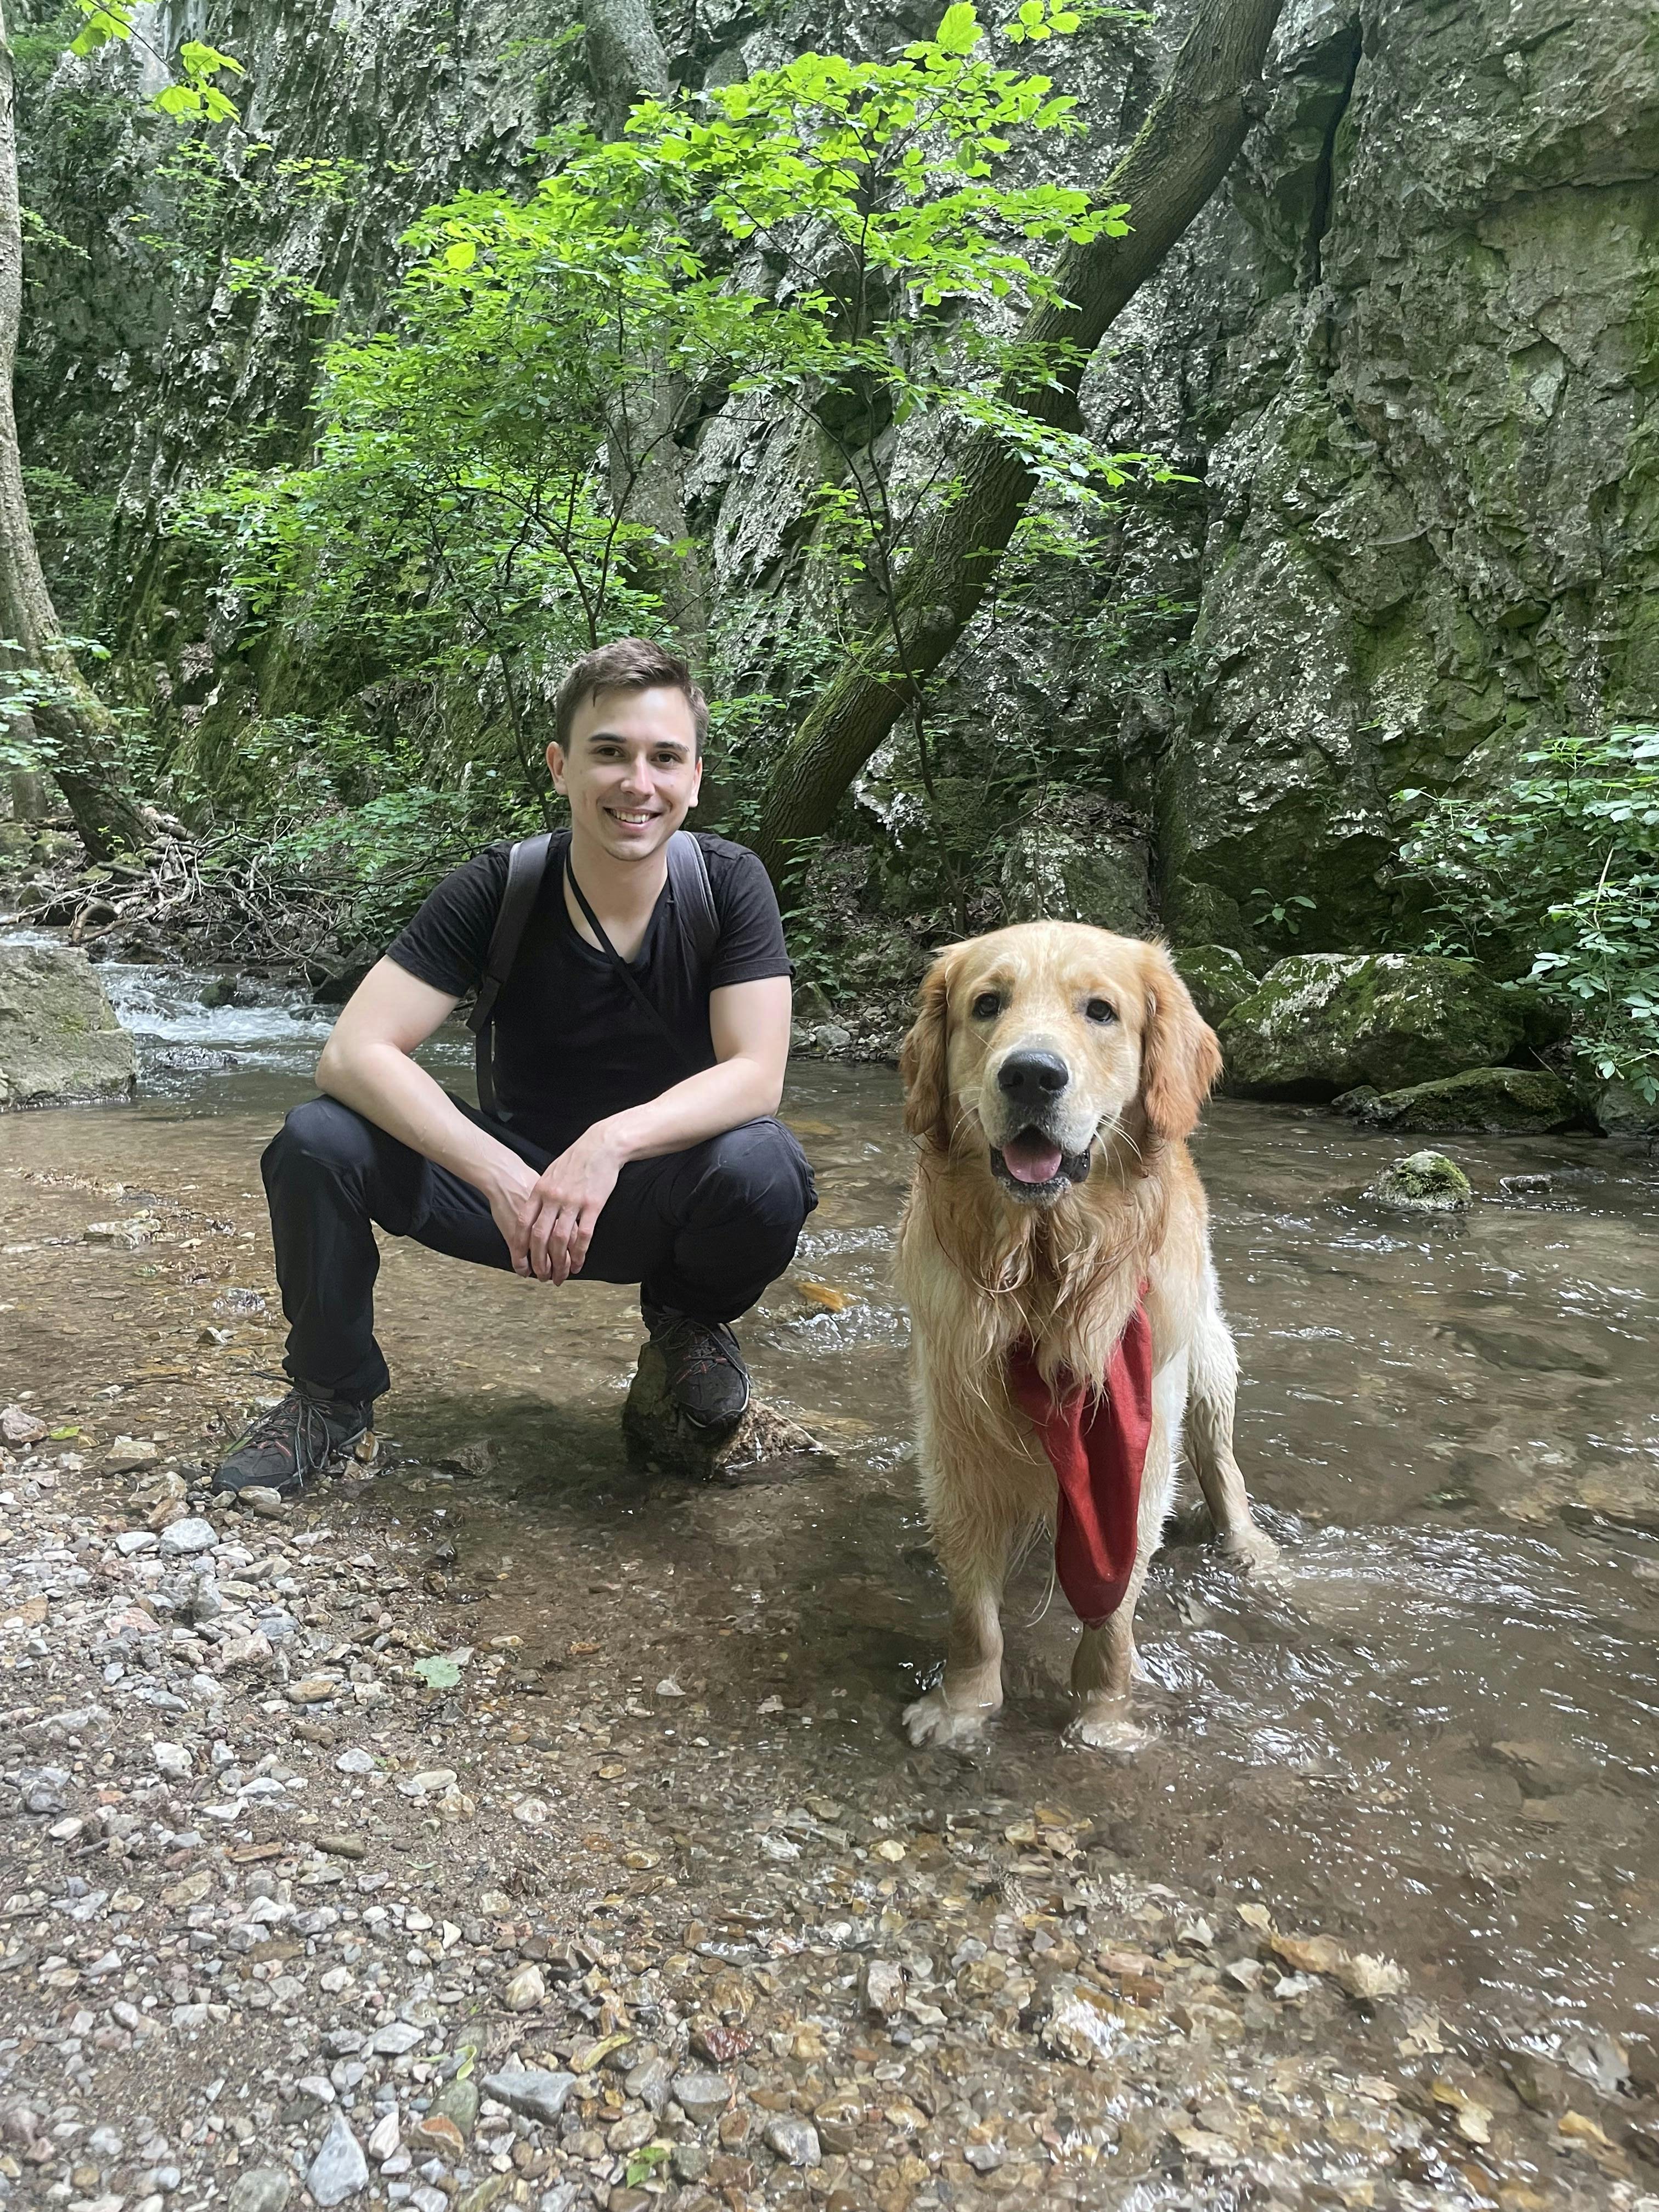 Erik Kandalík and his loyal Golden Retriever, Gaston, enjoying a peaceful moment in nature. They are surrounded by greenery, highlighting their bond in the great outdoors.